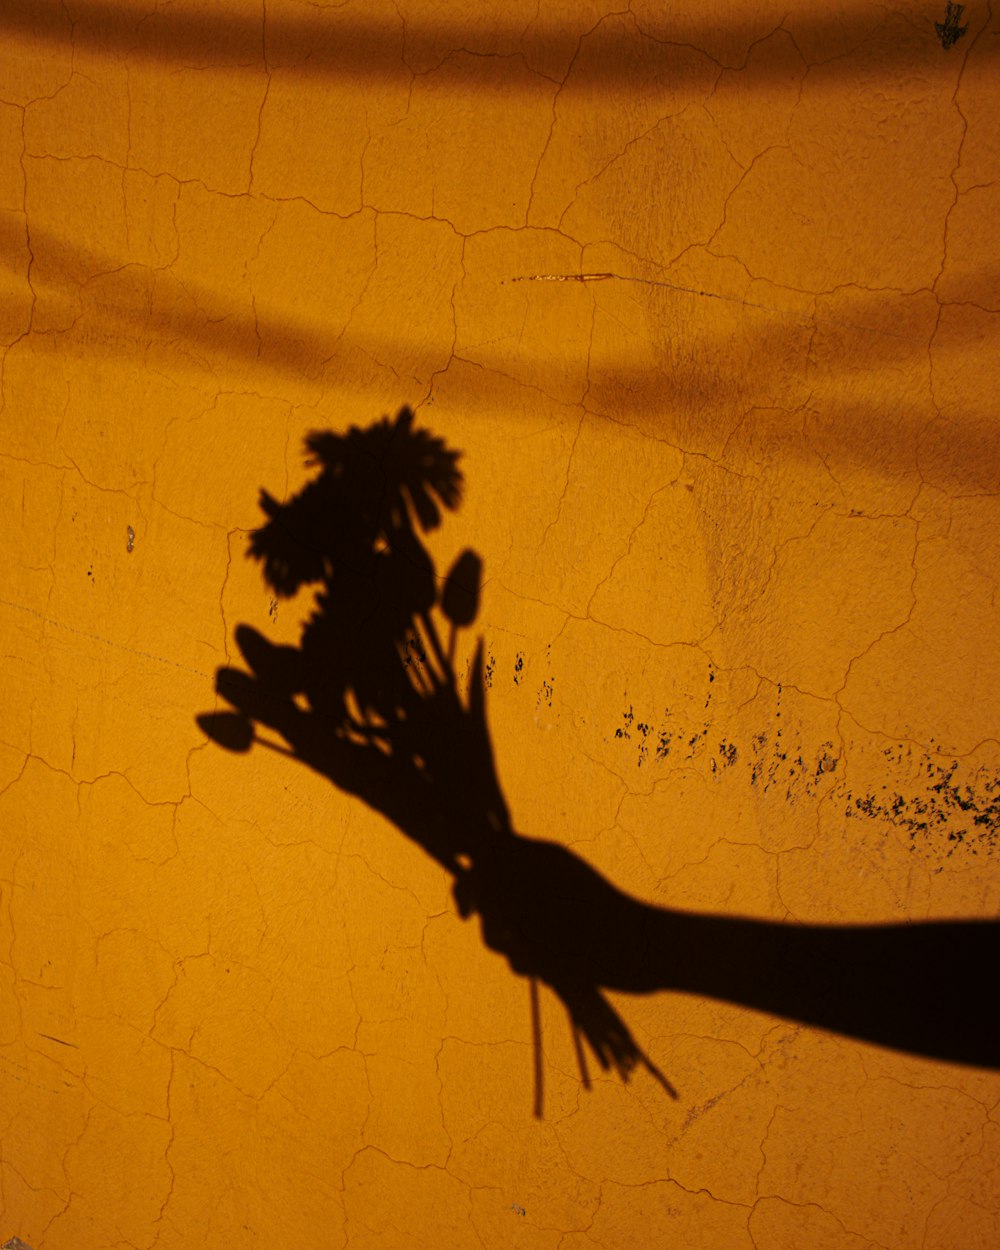 shadow of person holding sunflower